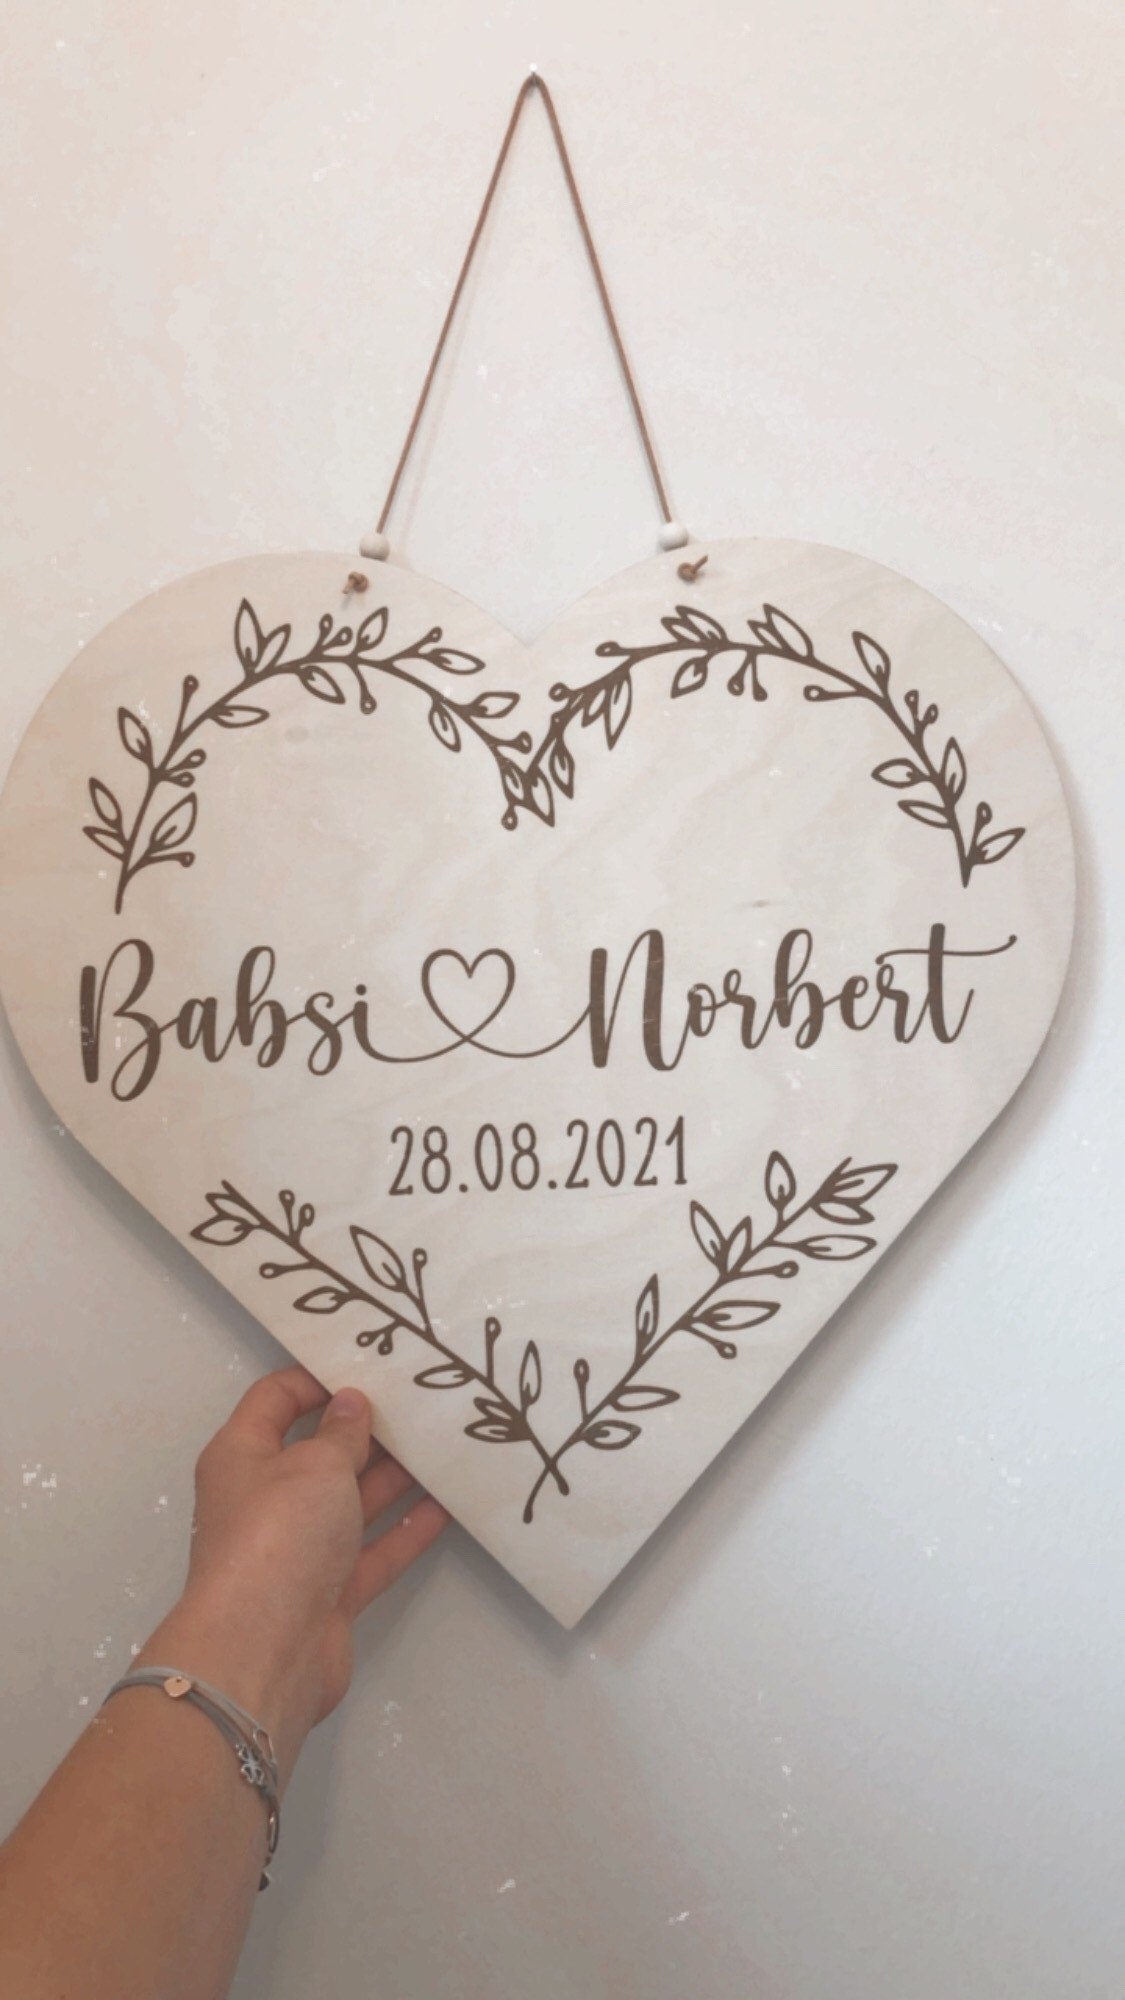 Wooden heart 40cm personalized with names and wedding date